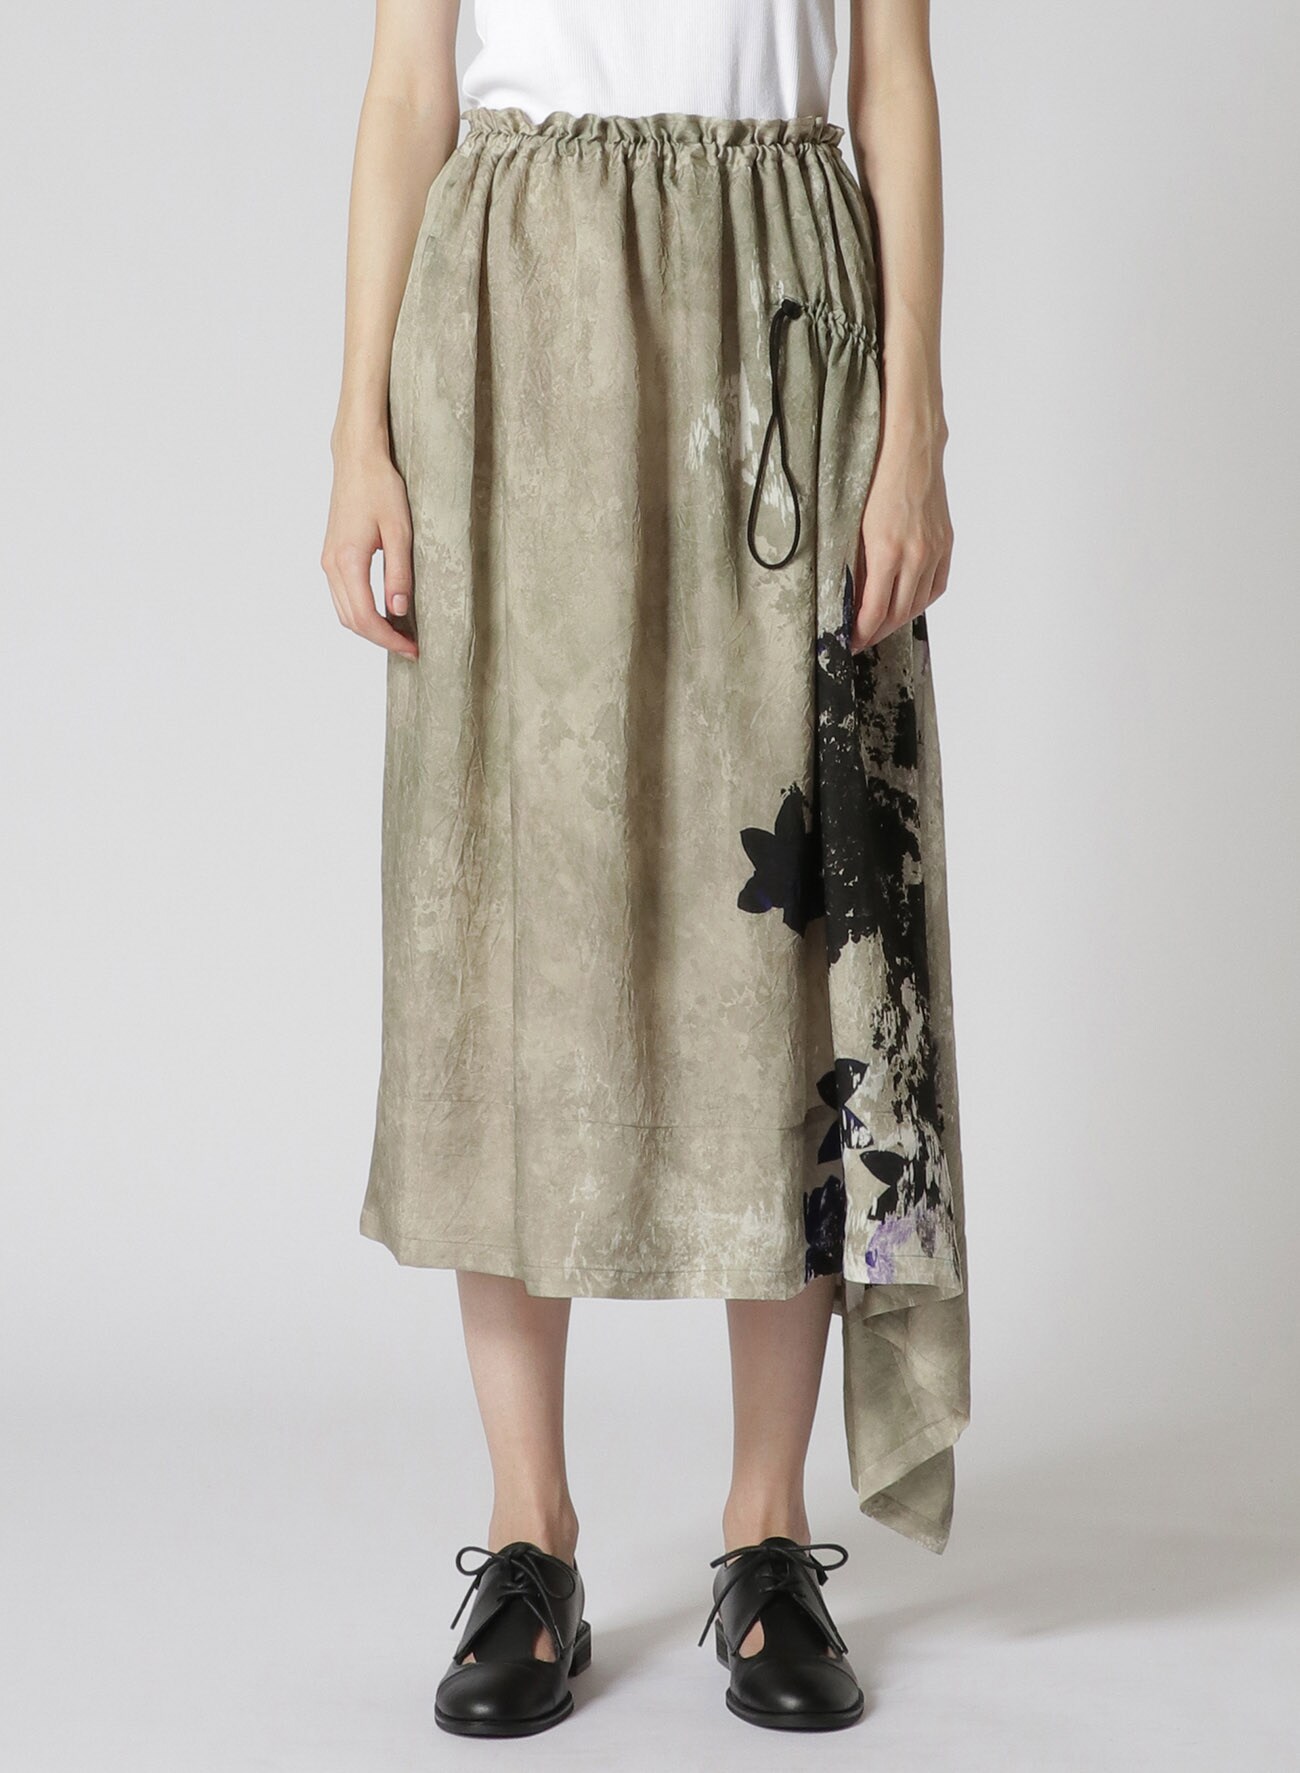 WRINKLED CUPRO SKIRT WITH FLOWER PRINT	